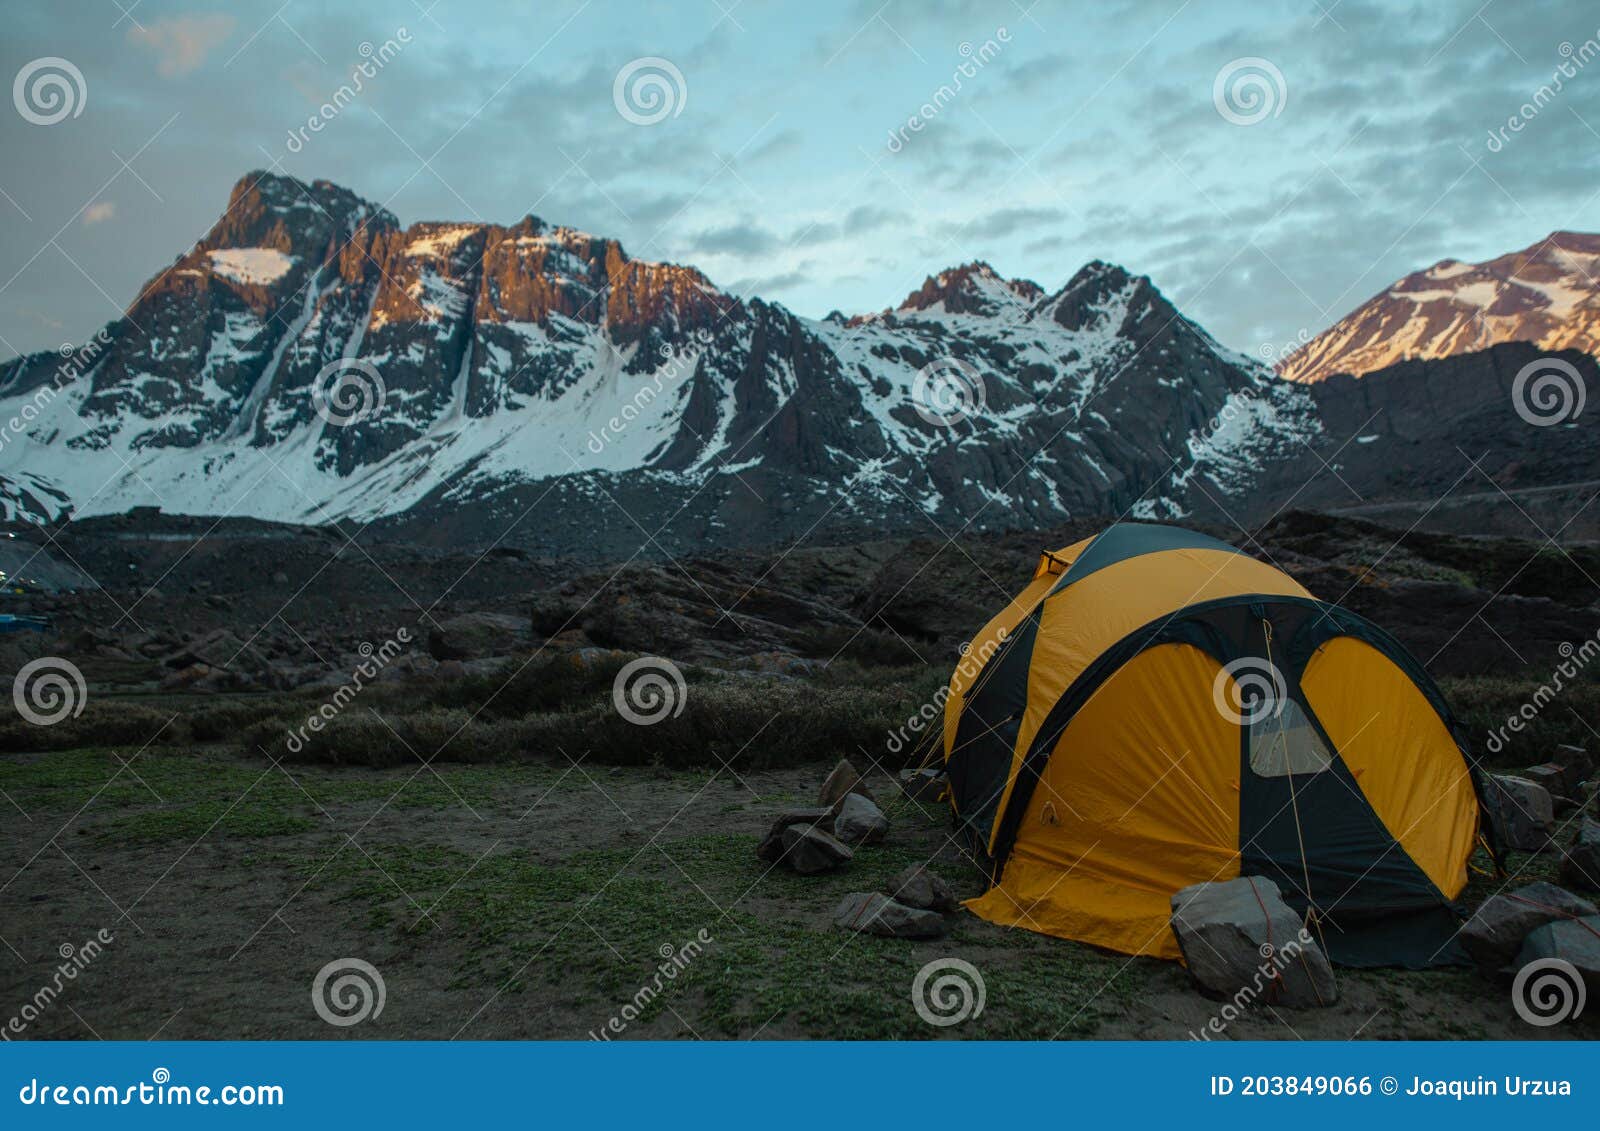 tent in the mountain during the sunrise